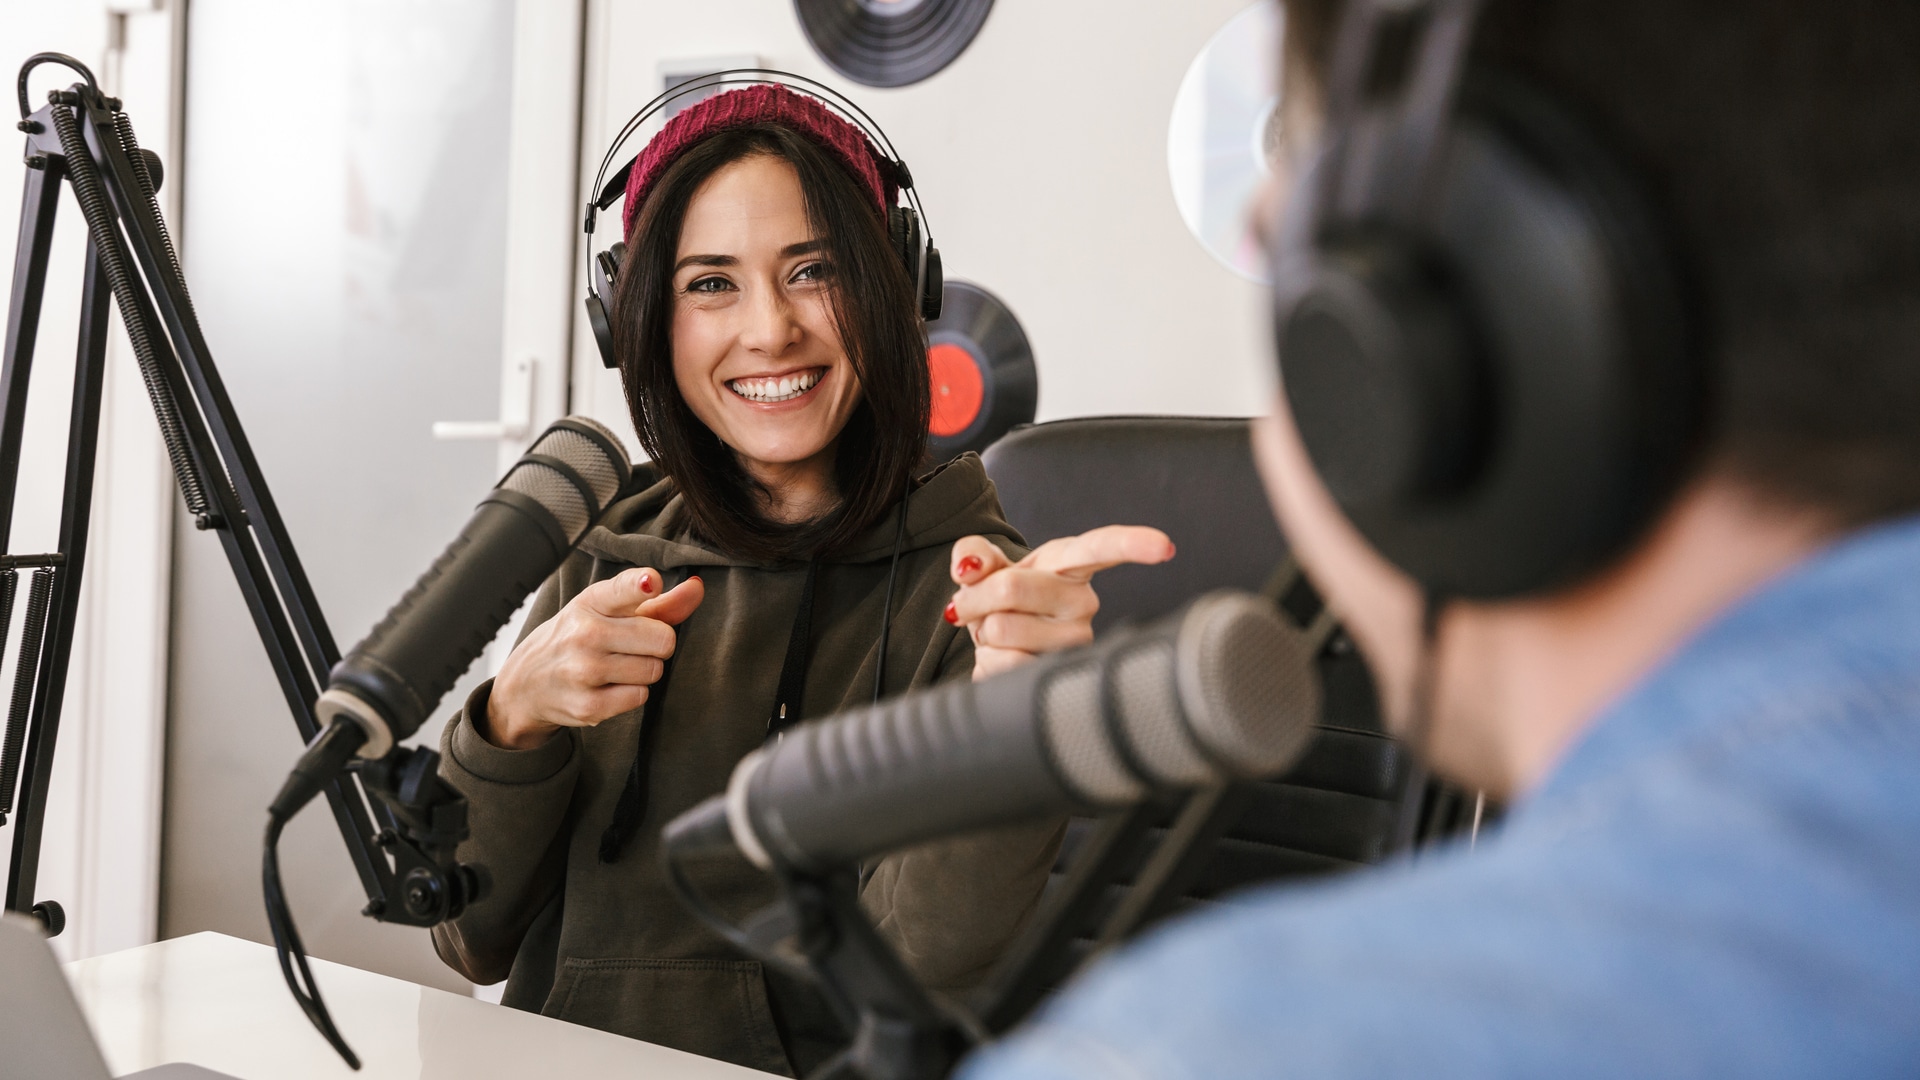 Podcast advertising spend surged in 2021